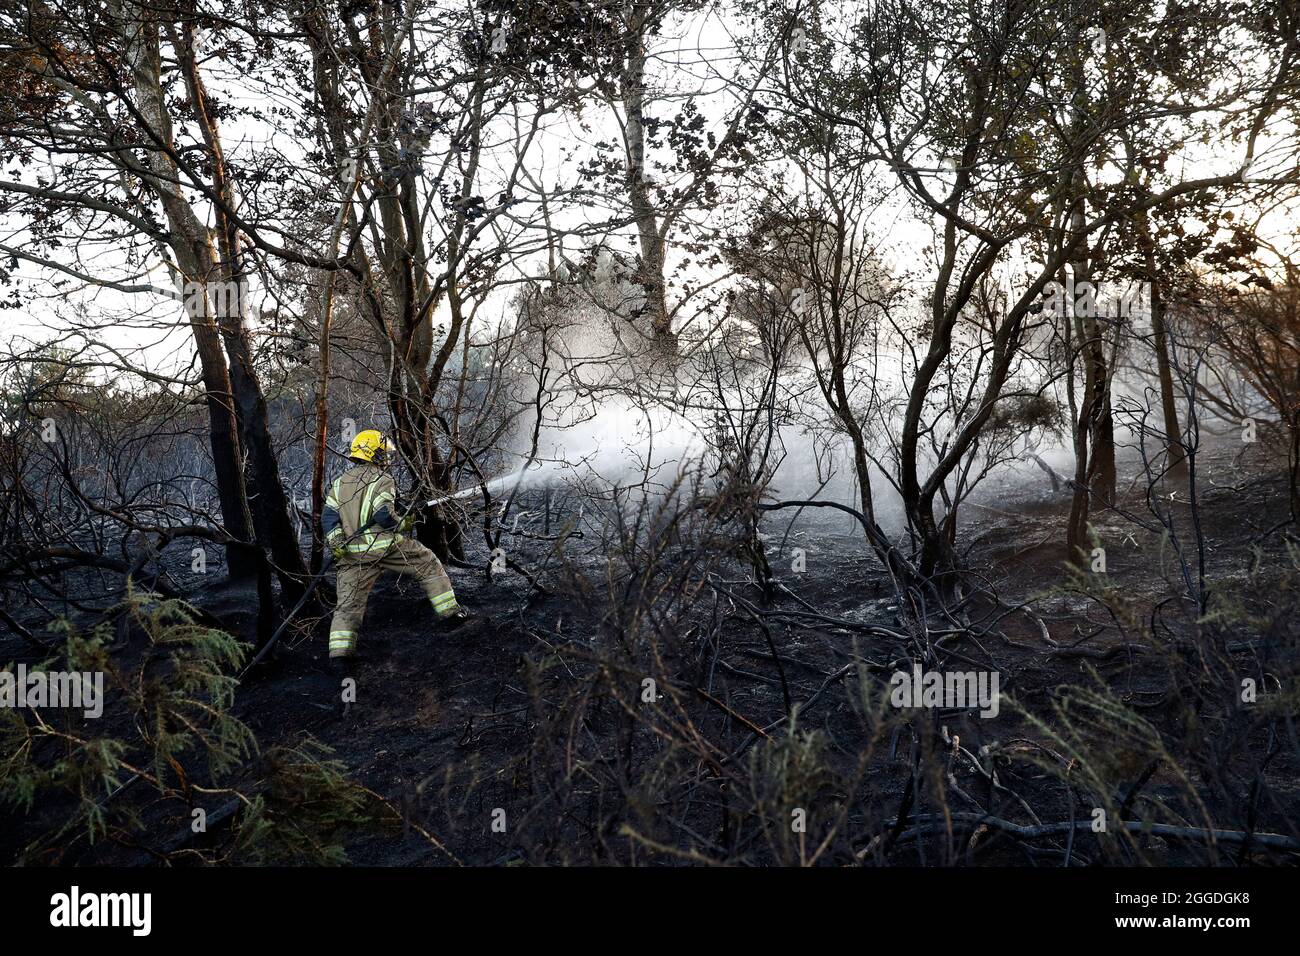 Firefighters from Hampshire Fire and Rescue spray water to douse the flames and put out a wildfire on heathland near Yateley. Stock Photo